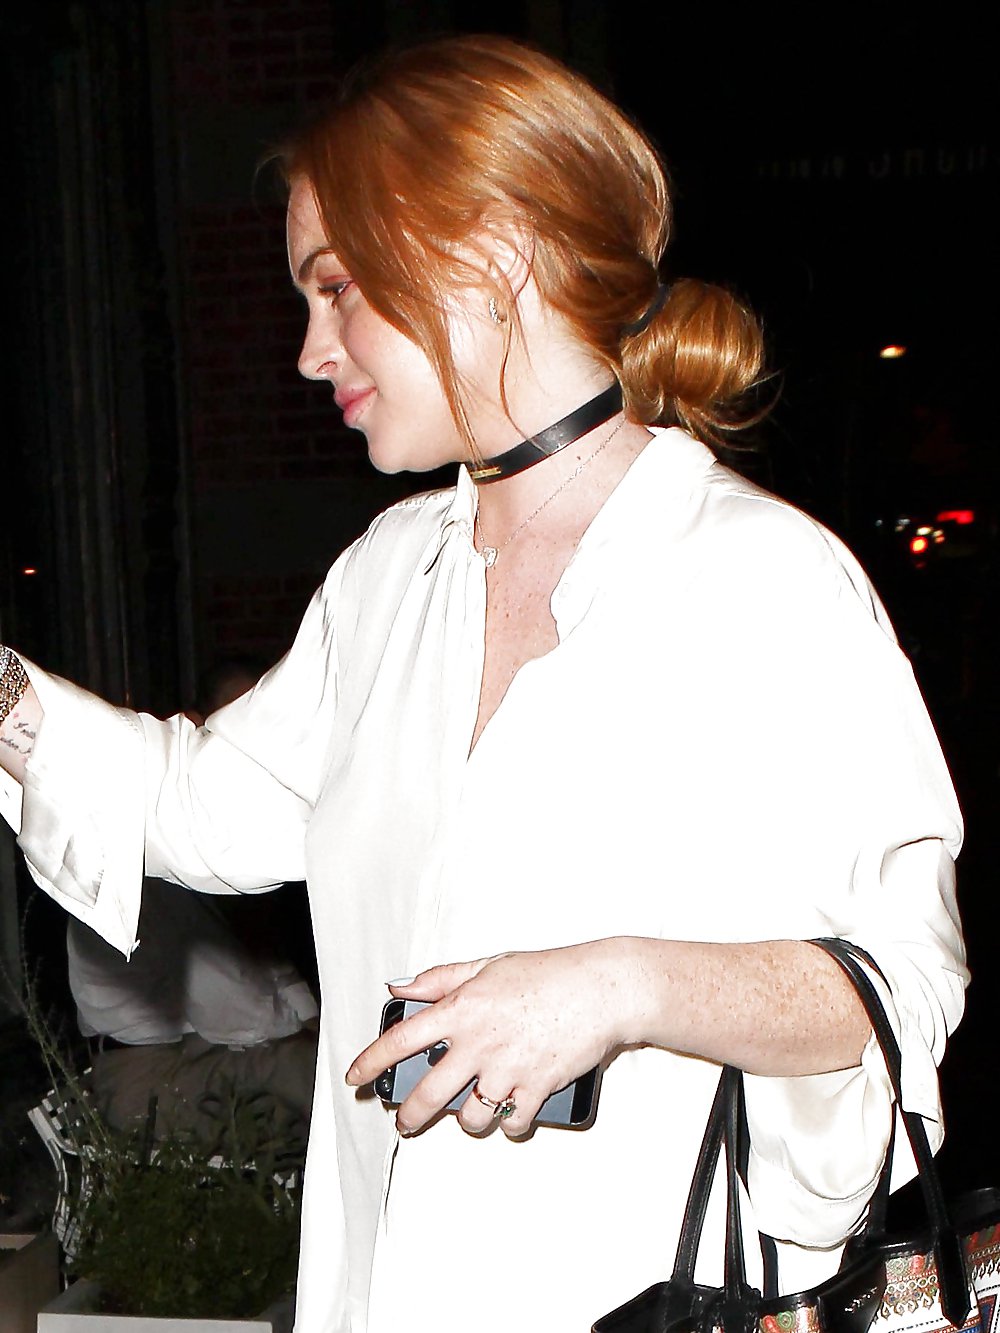 Lindsay Lohan ... Night Out In SoHo Area #23264226